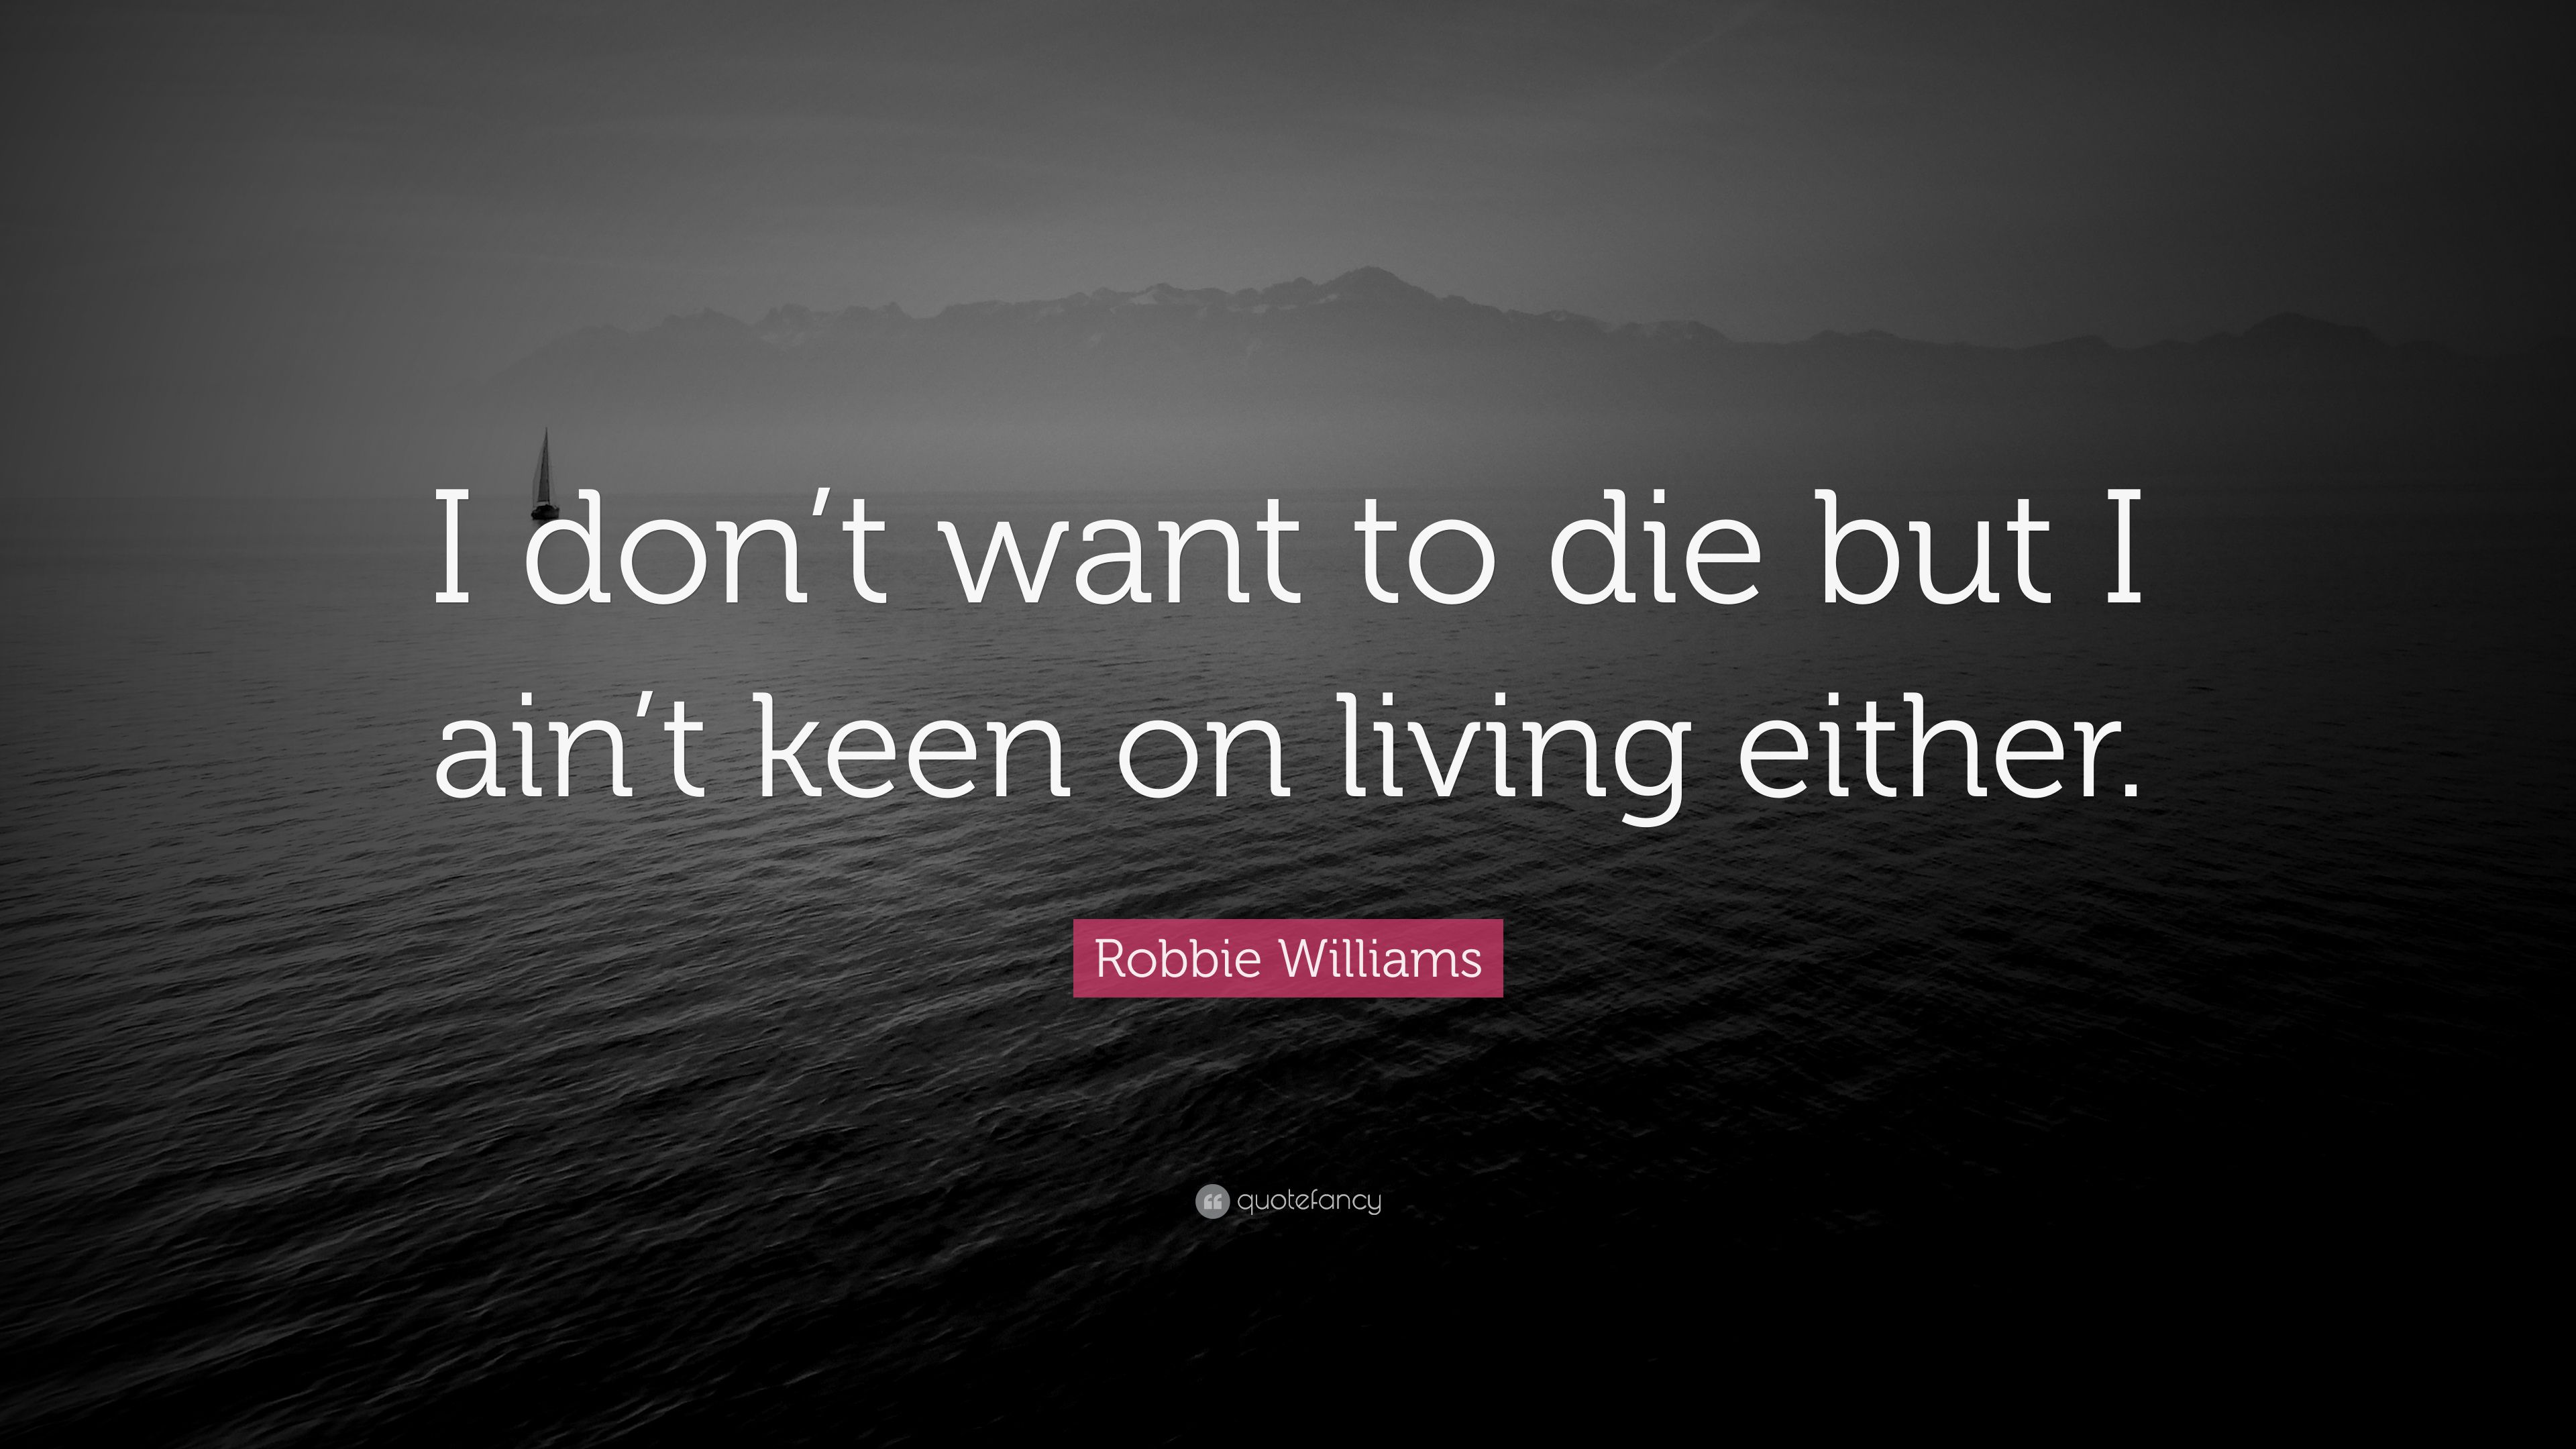 Robbie Williams Quote: “I don't want to die but I ain't keen